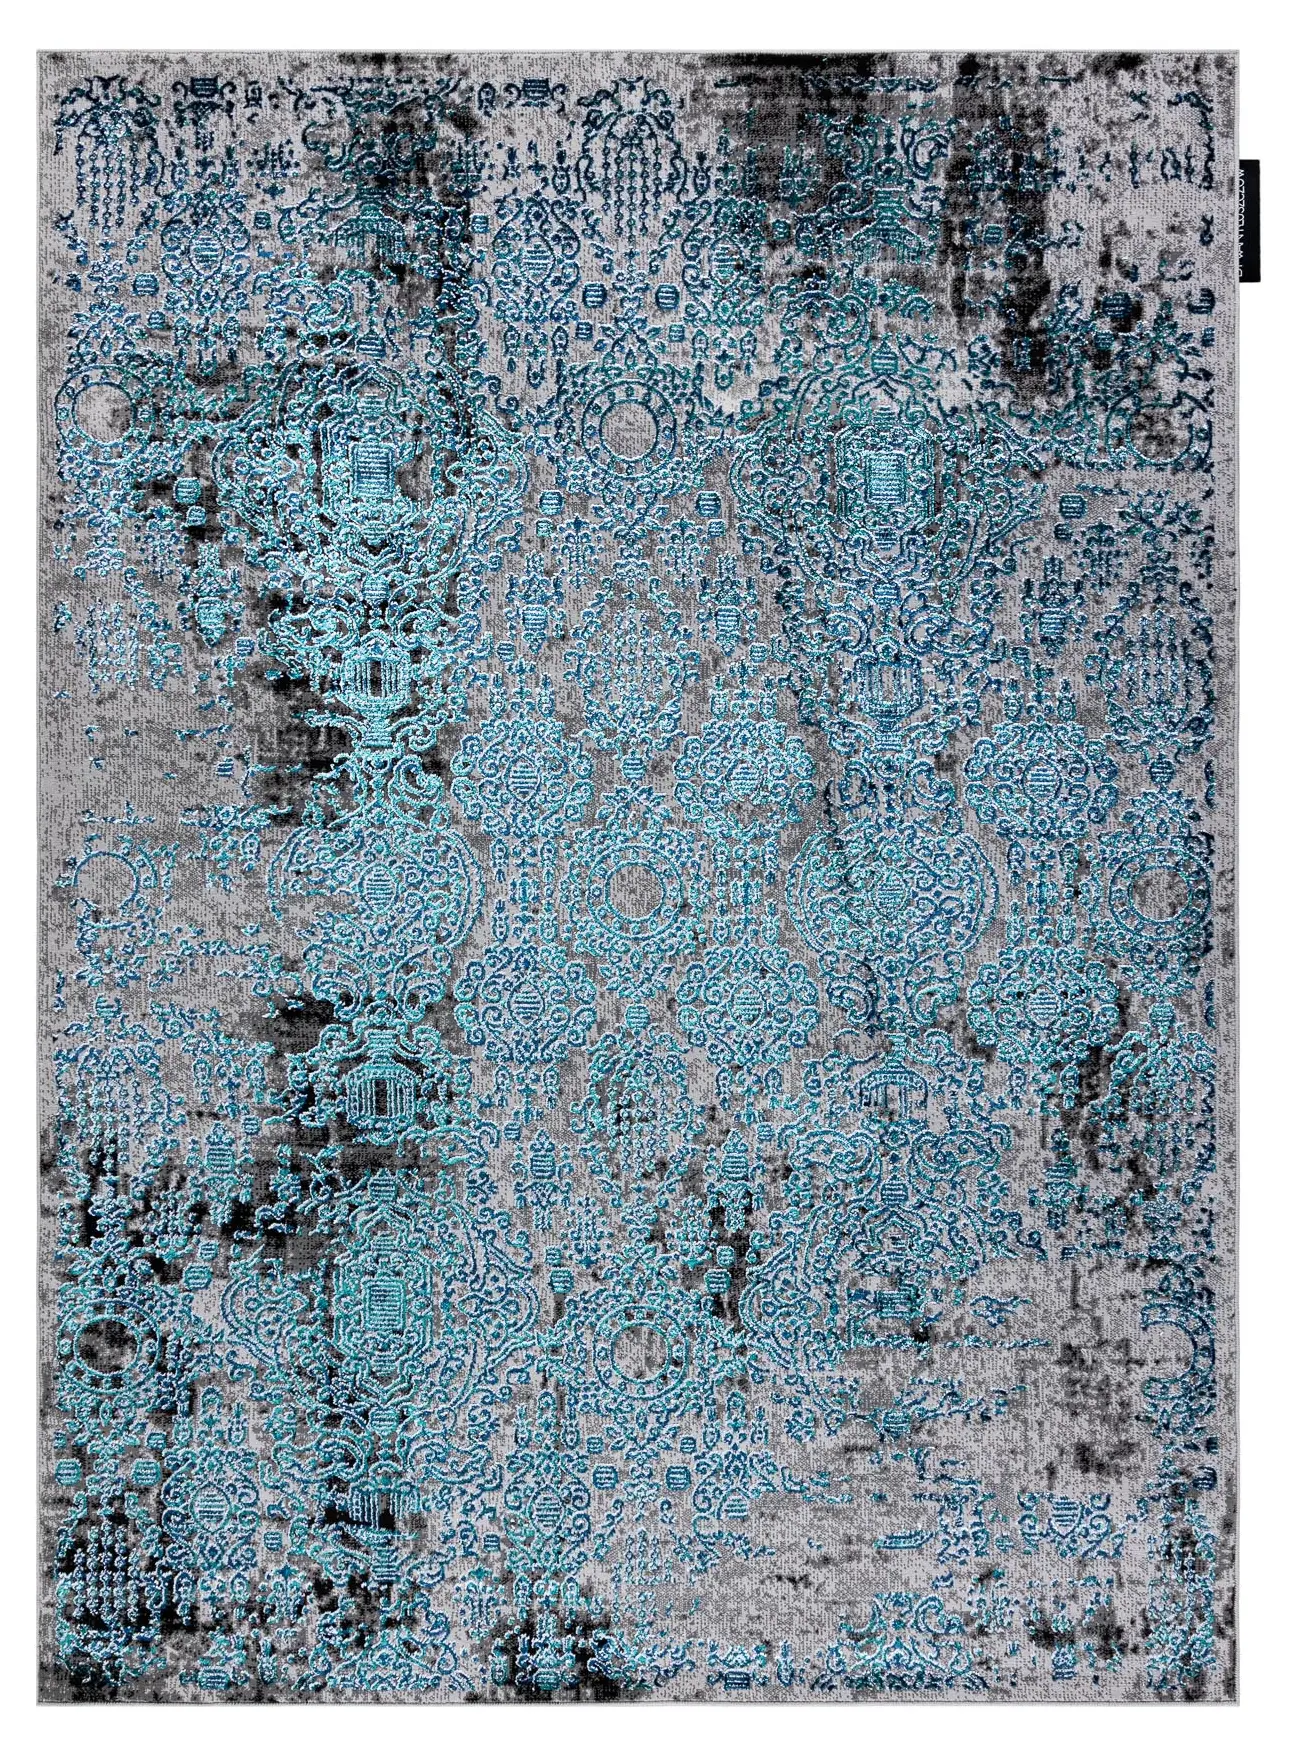 Tapis De Luxe Moderne 2081 Ornement